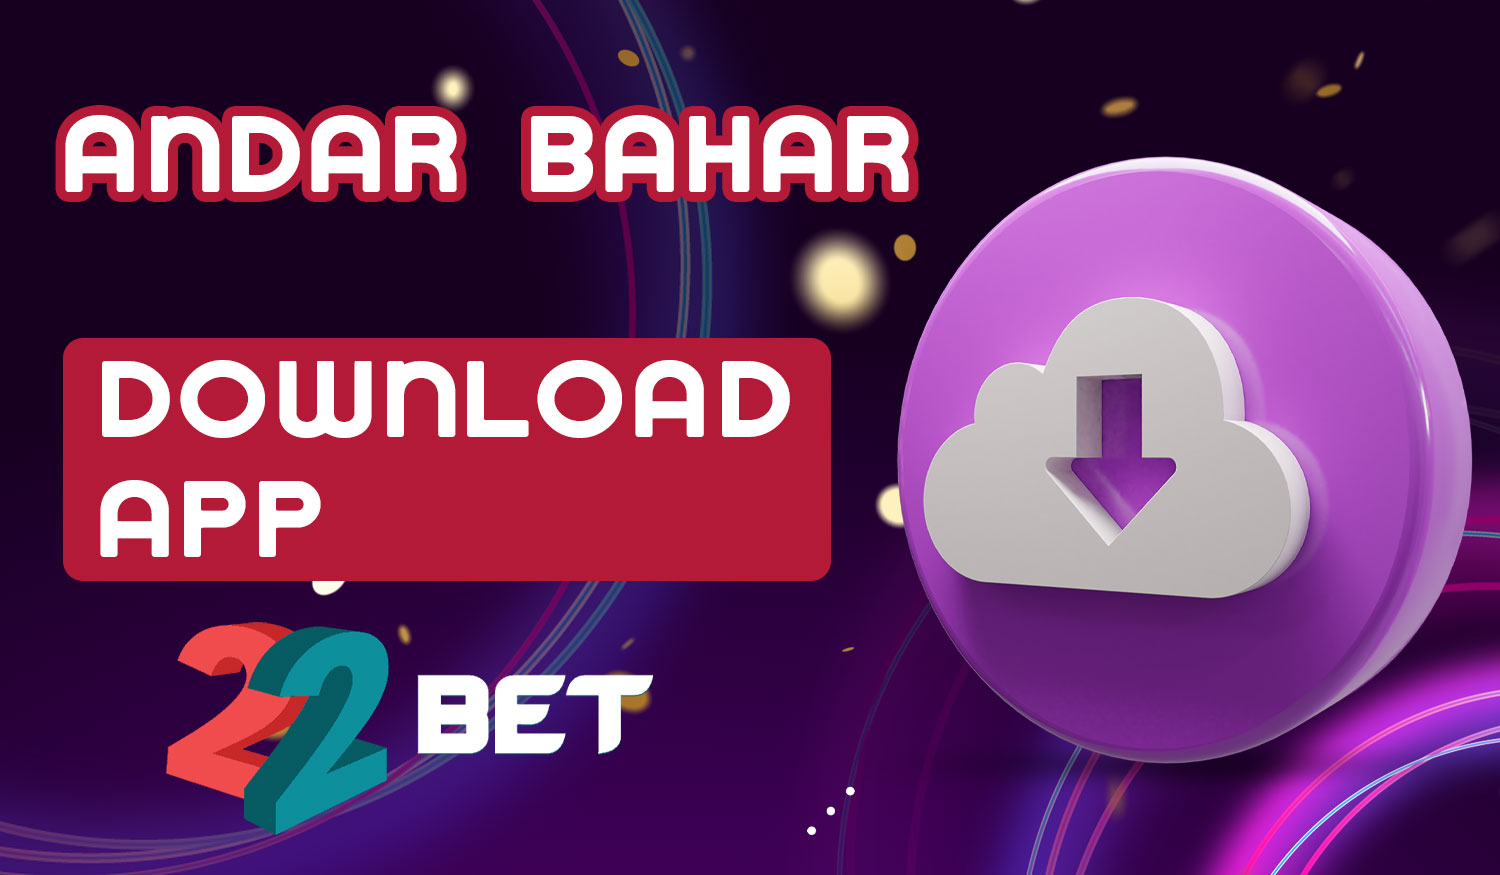 Detailed guide on how to download and install the 22Bet India mobile application for playing Andar Bahar